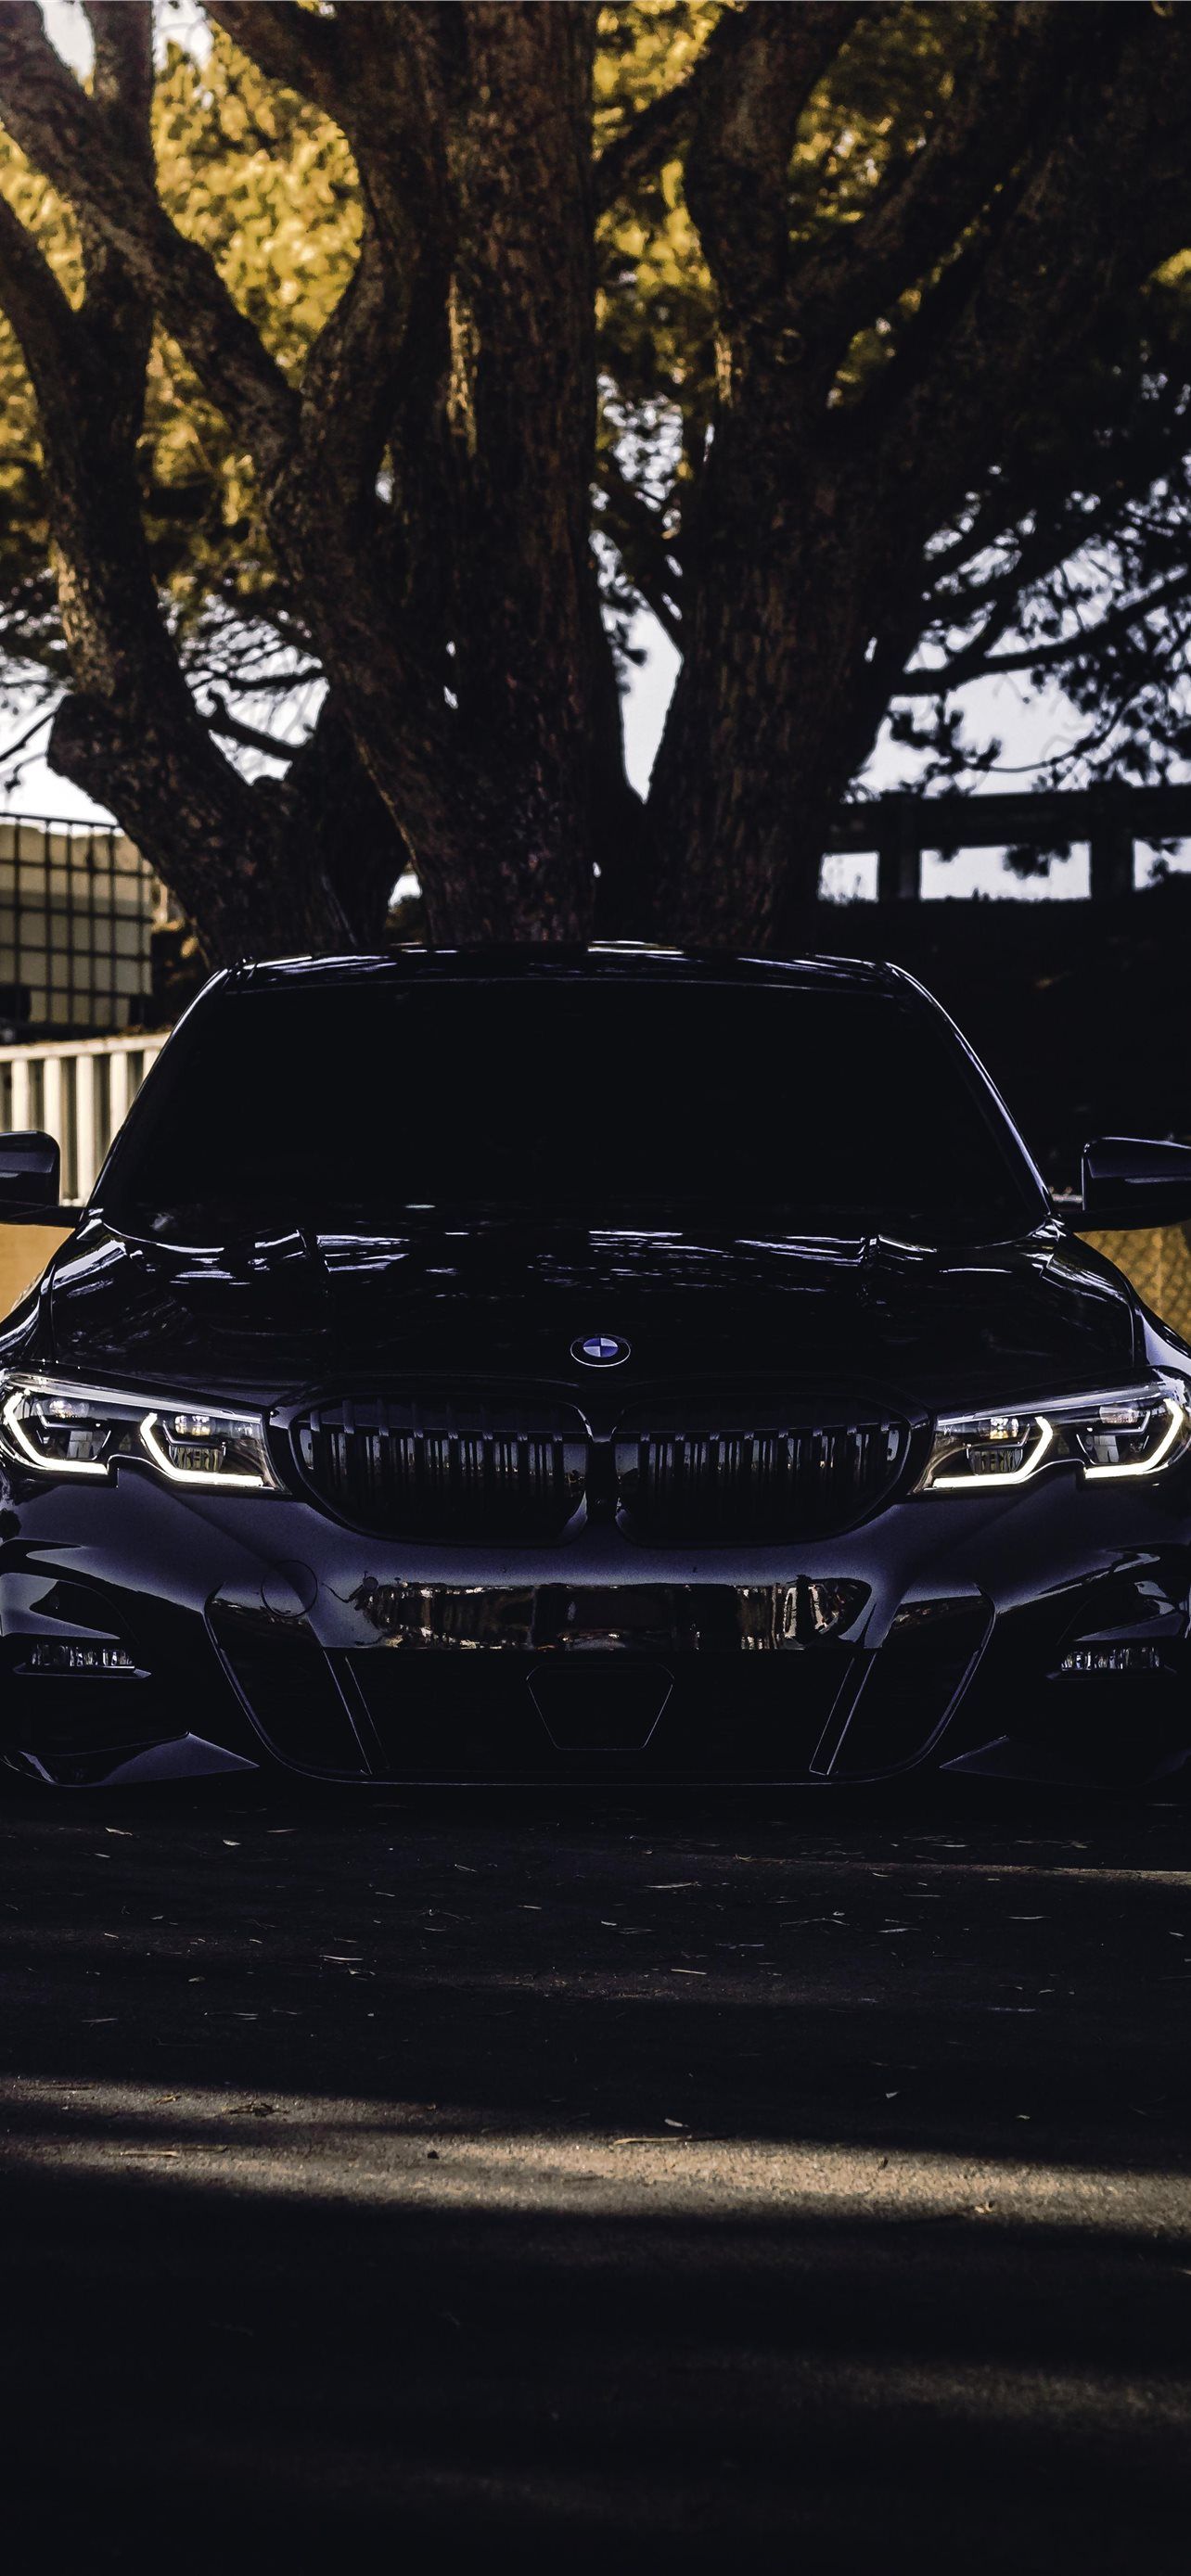 Bmw 3 series front view in the forest wallpaper 1242x2688 - BMW